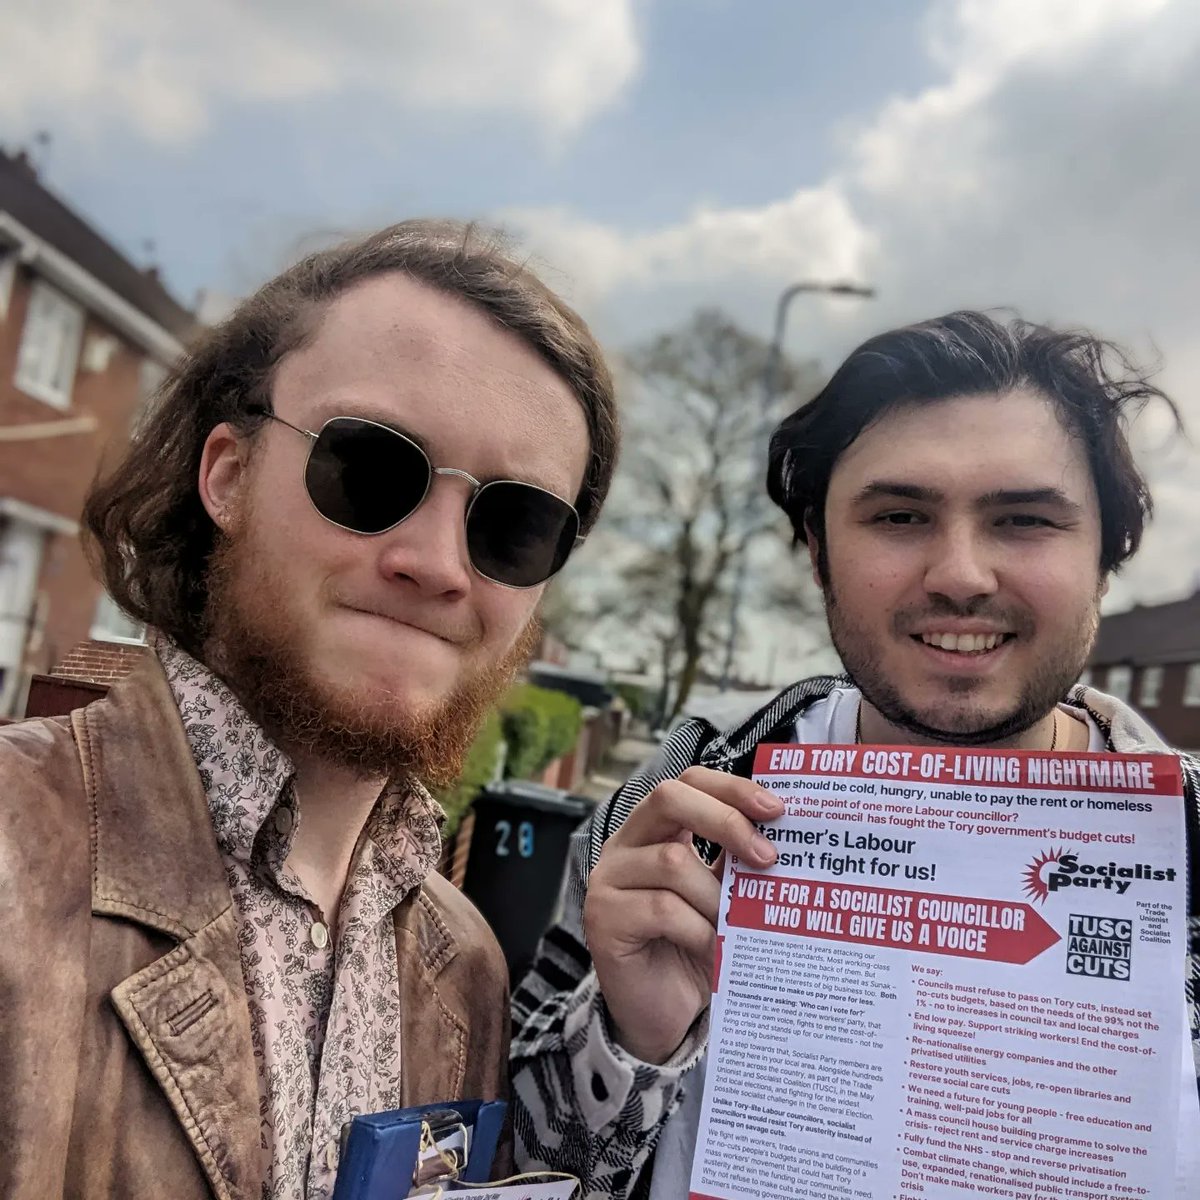 One final push this morning in St Oswald Ward, Sefton for our brilliant young council candidate Conor O'Neill ahead of tomorrow's local elections. A brilliant response from locals who are hungry for a real socialist alternative to both Labour, the Tories and Greens. Vote TUSC.